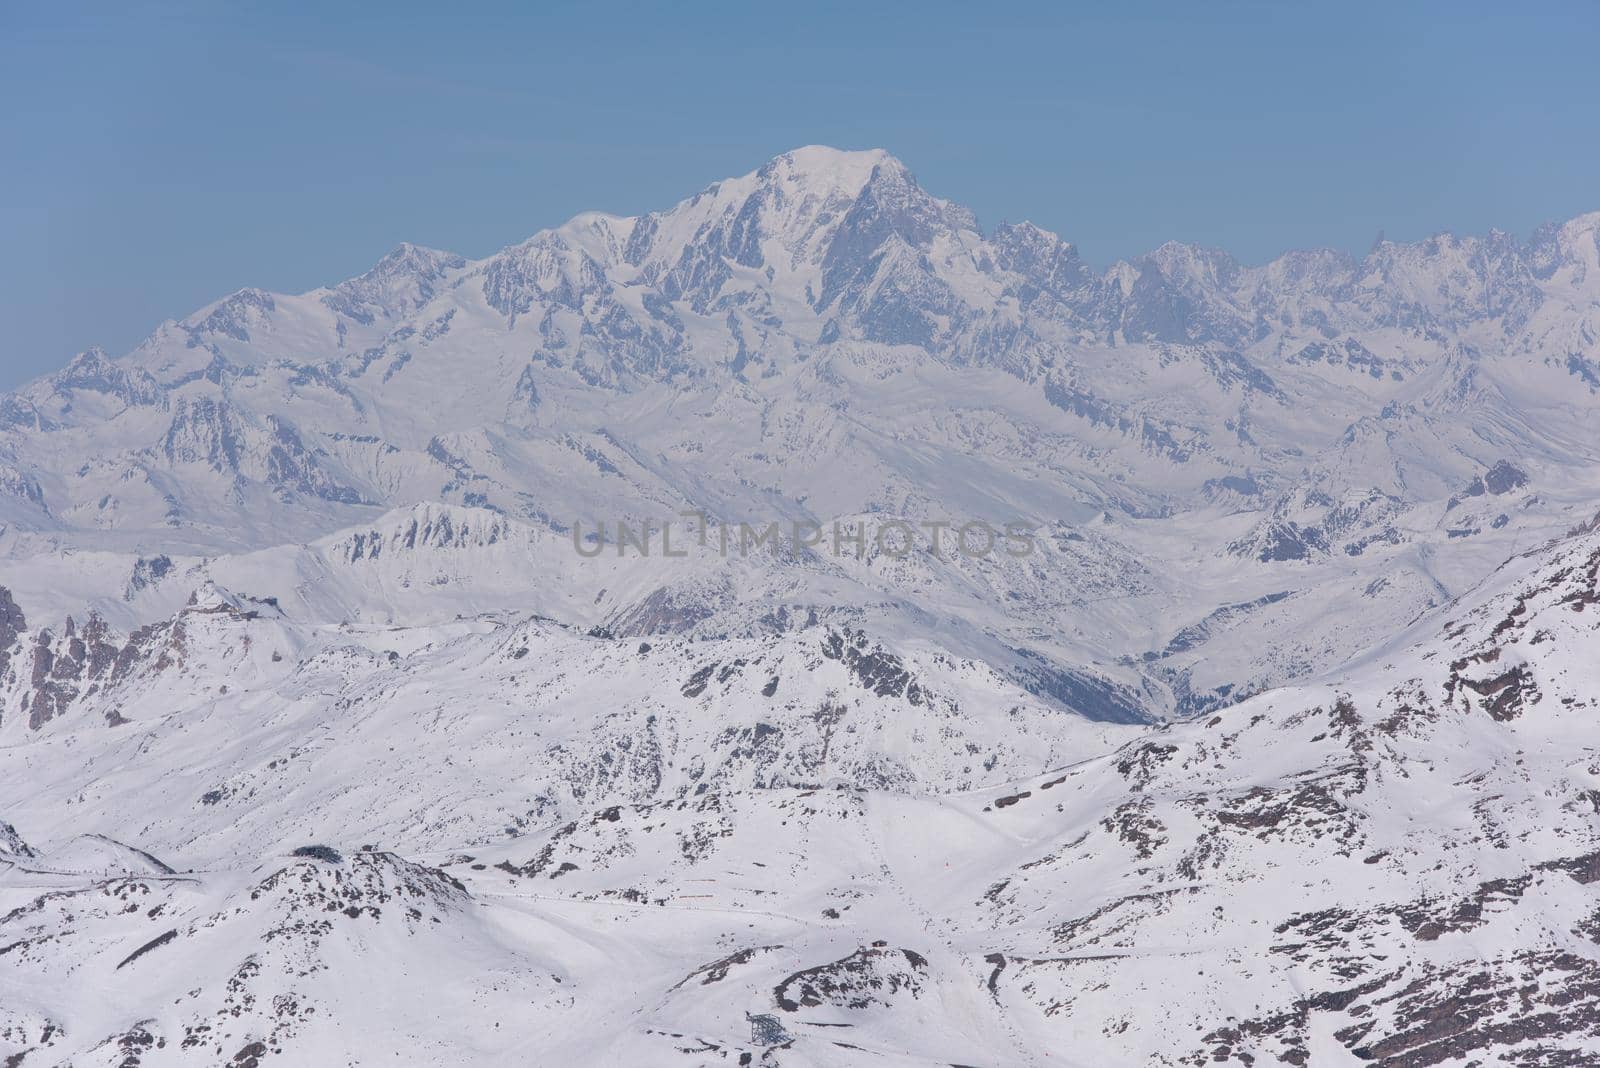 mountain landscape at winter with fresh snow on beautiful sunny day at french alps